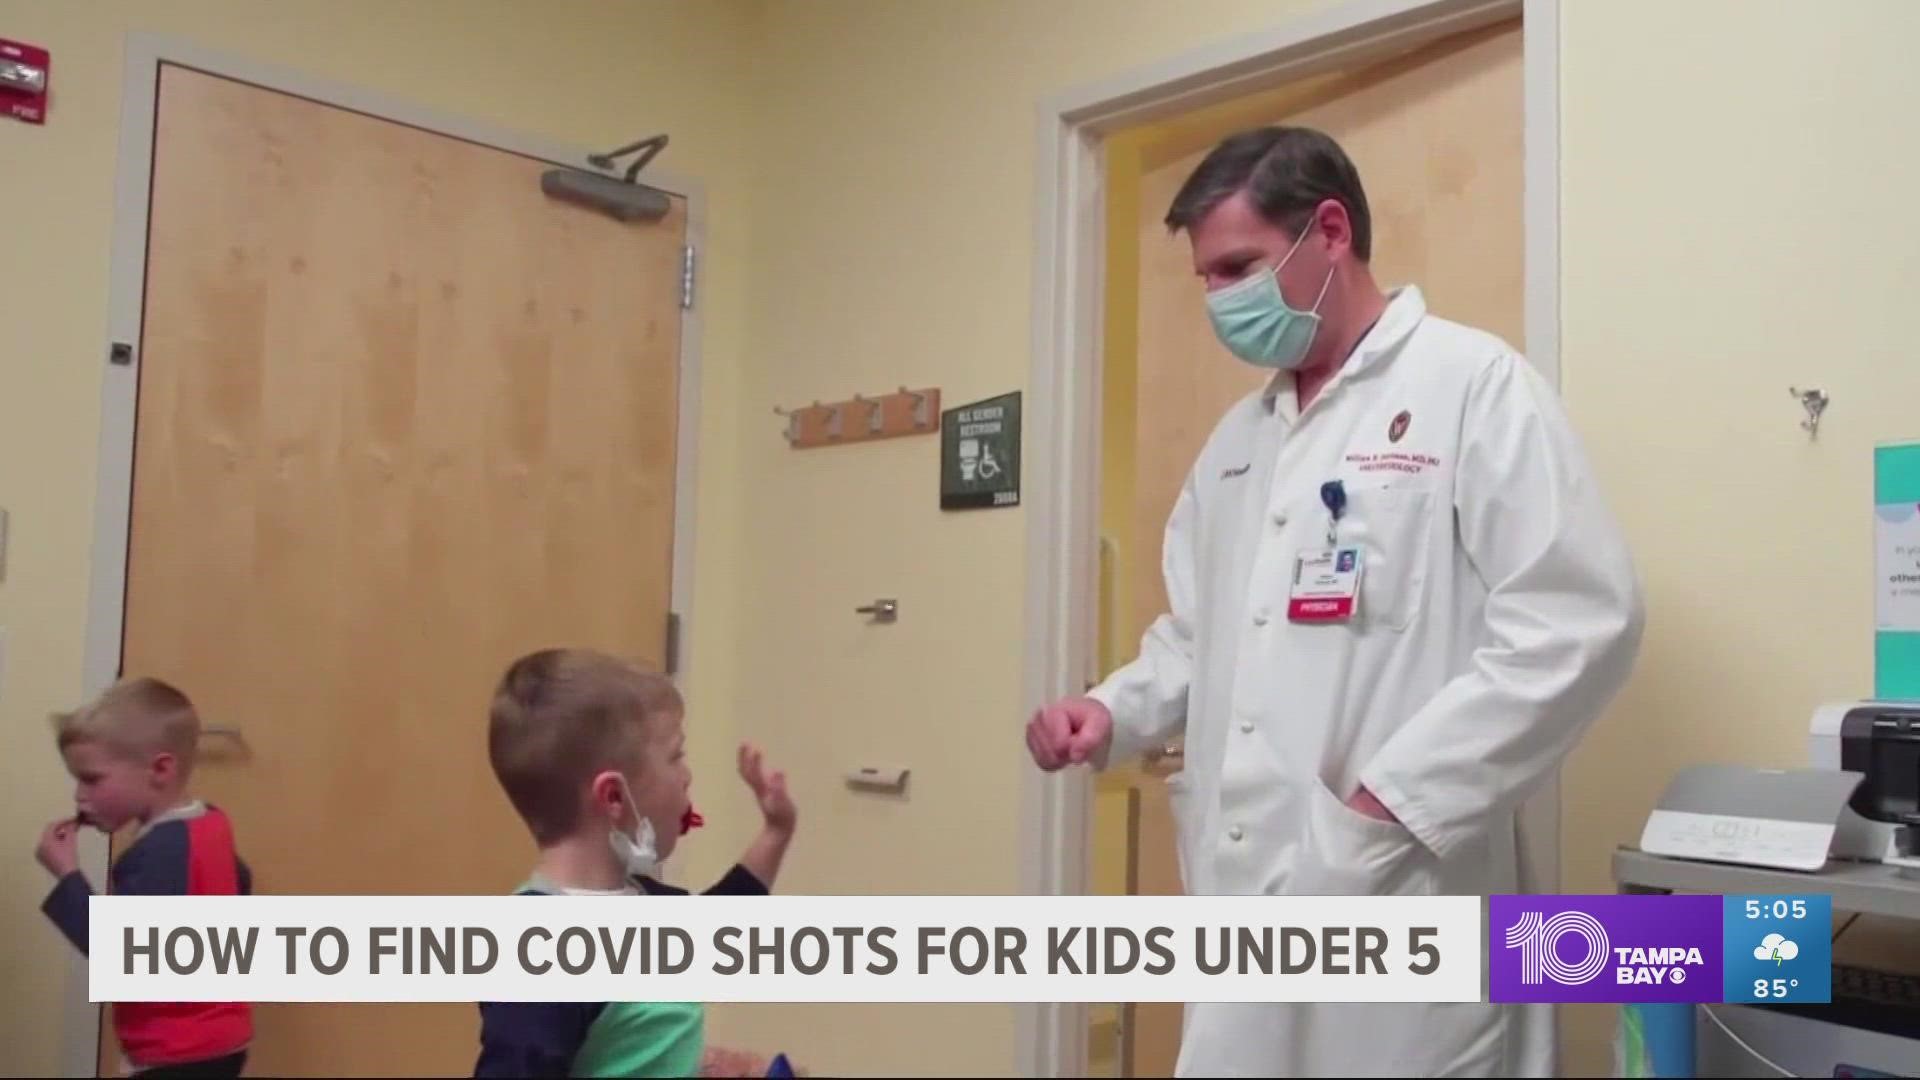 Over the weekend the CDC approved the COVID-19 vaccine for children under the age of 5, but what does the rollout look like in Florida?